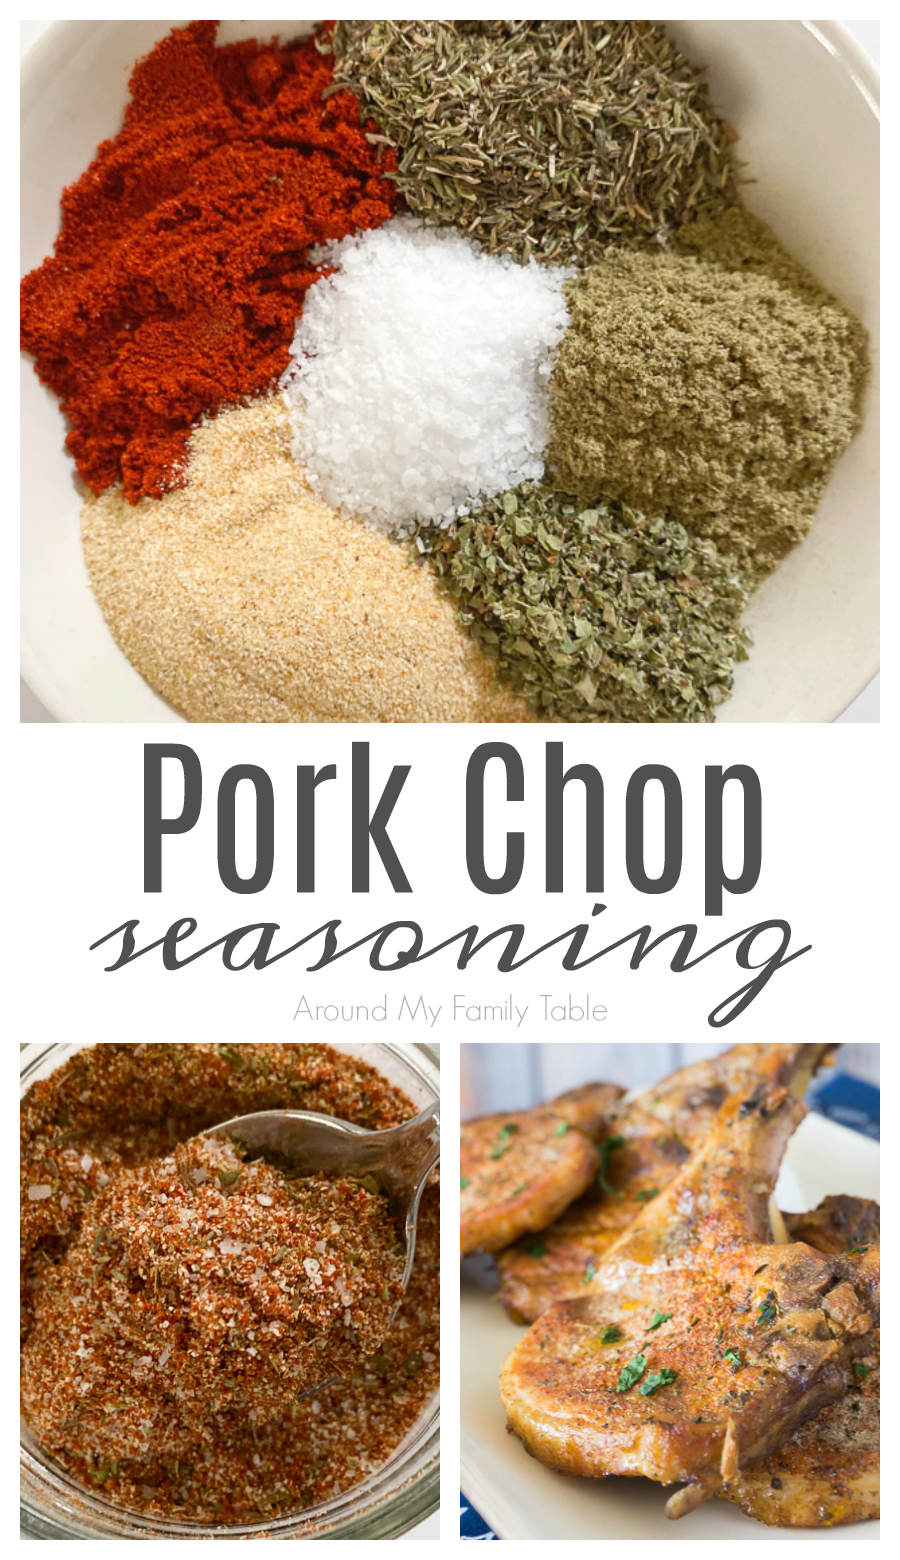 Pork chop seasoning is easy to make and the flavor it gives to otherwise bland pork is amazing! Make this spice blend recipe with 6 pantry staples! via @slingmama